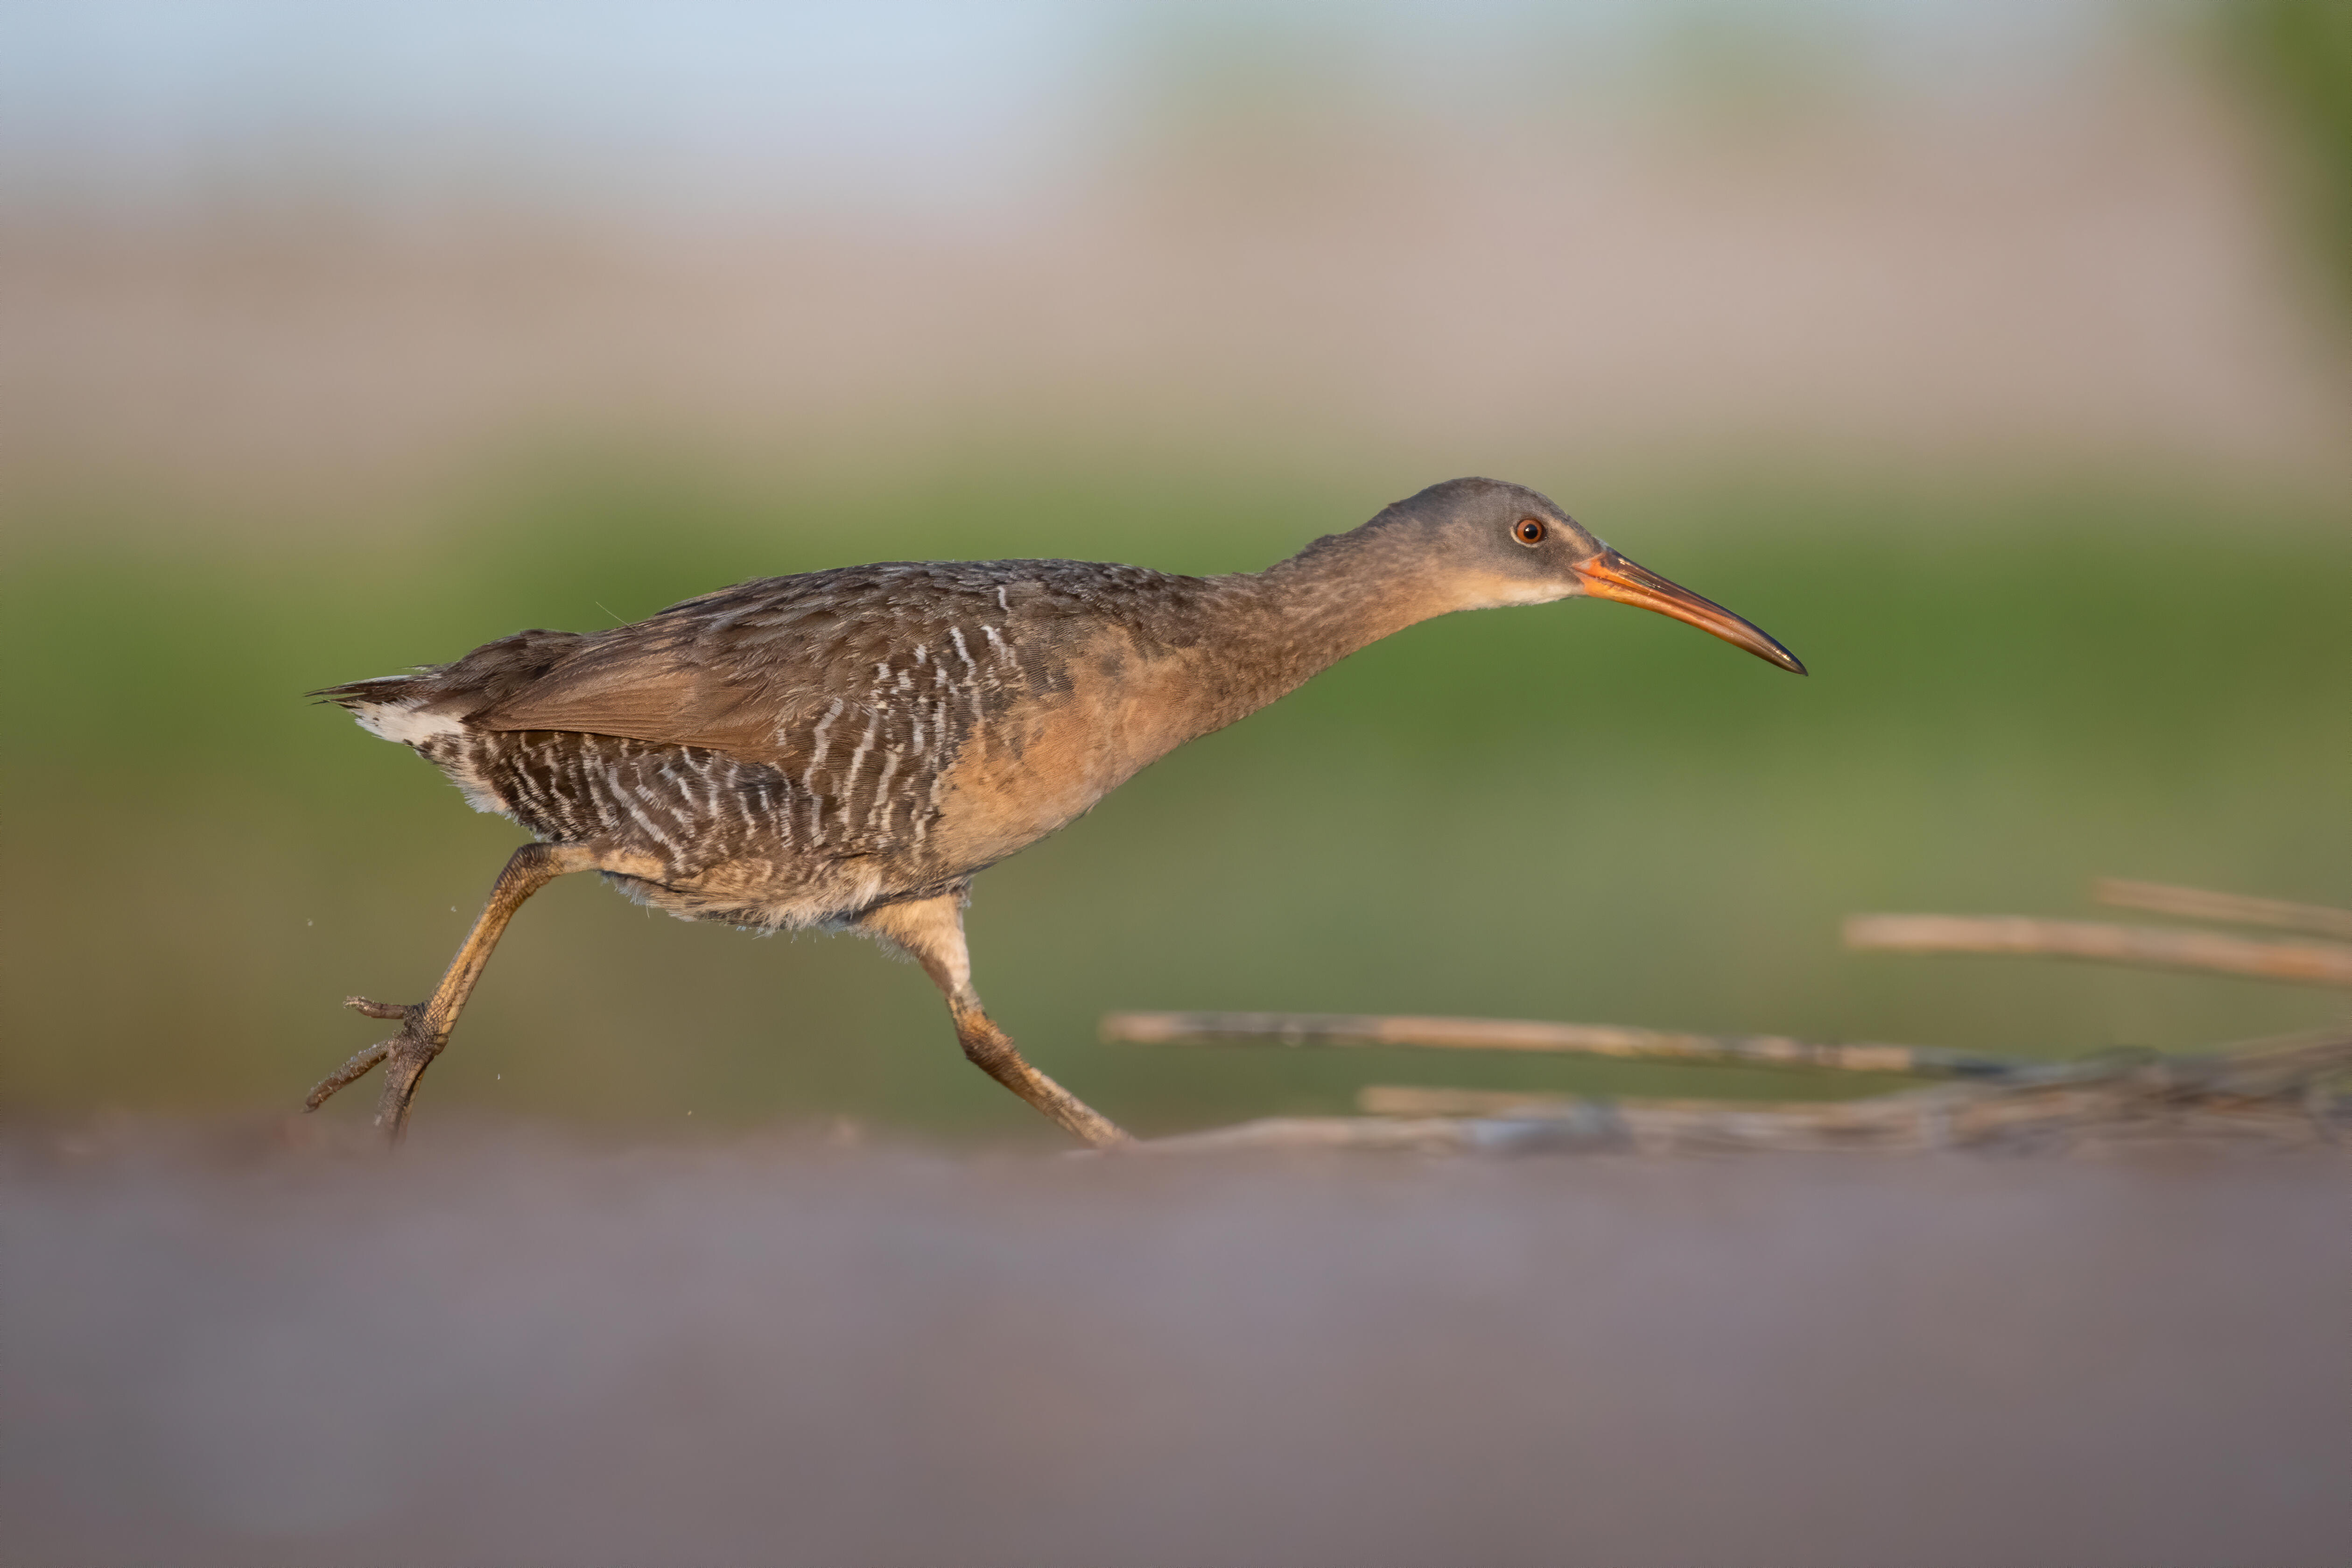 Clapper Rail caught in motion running. It is a large, slender, chicken-like bird with a long neck and long orange bill.